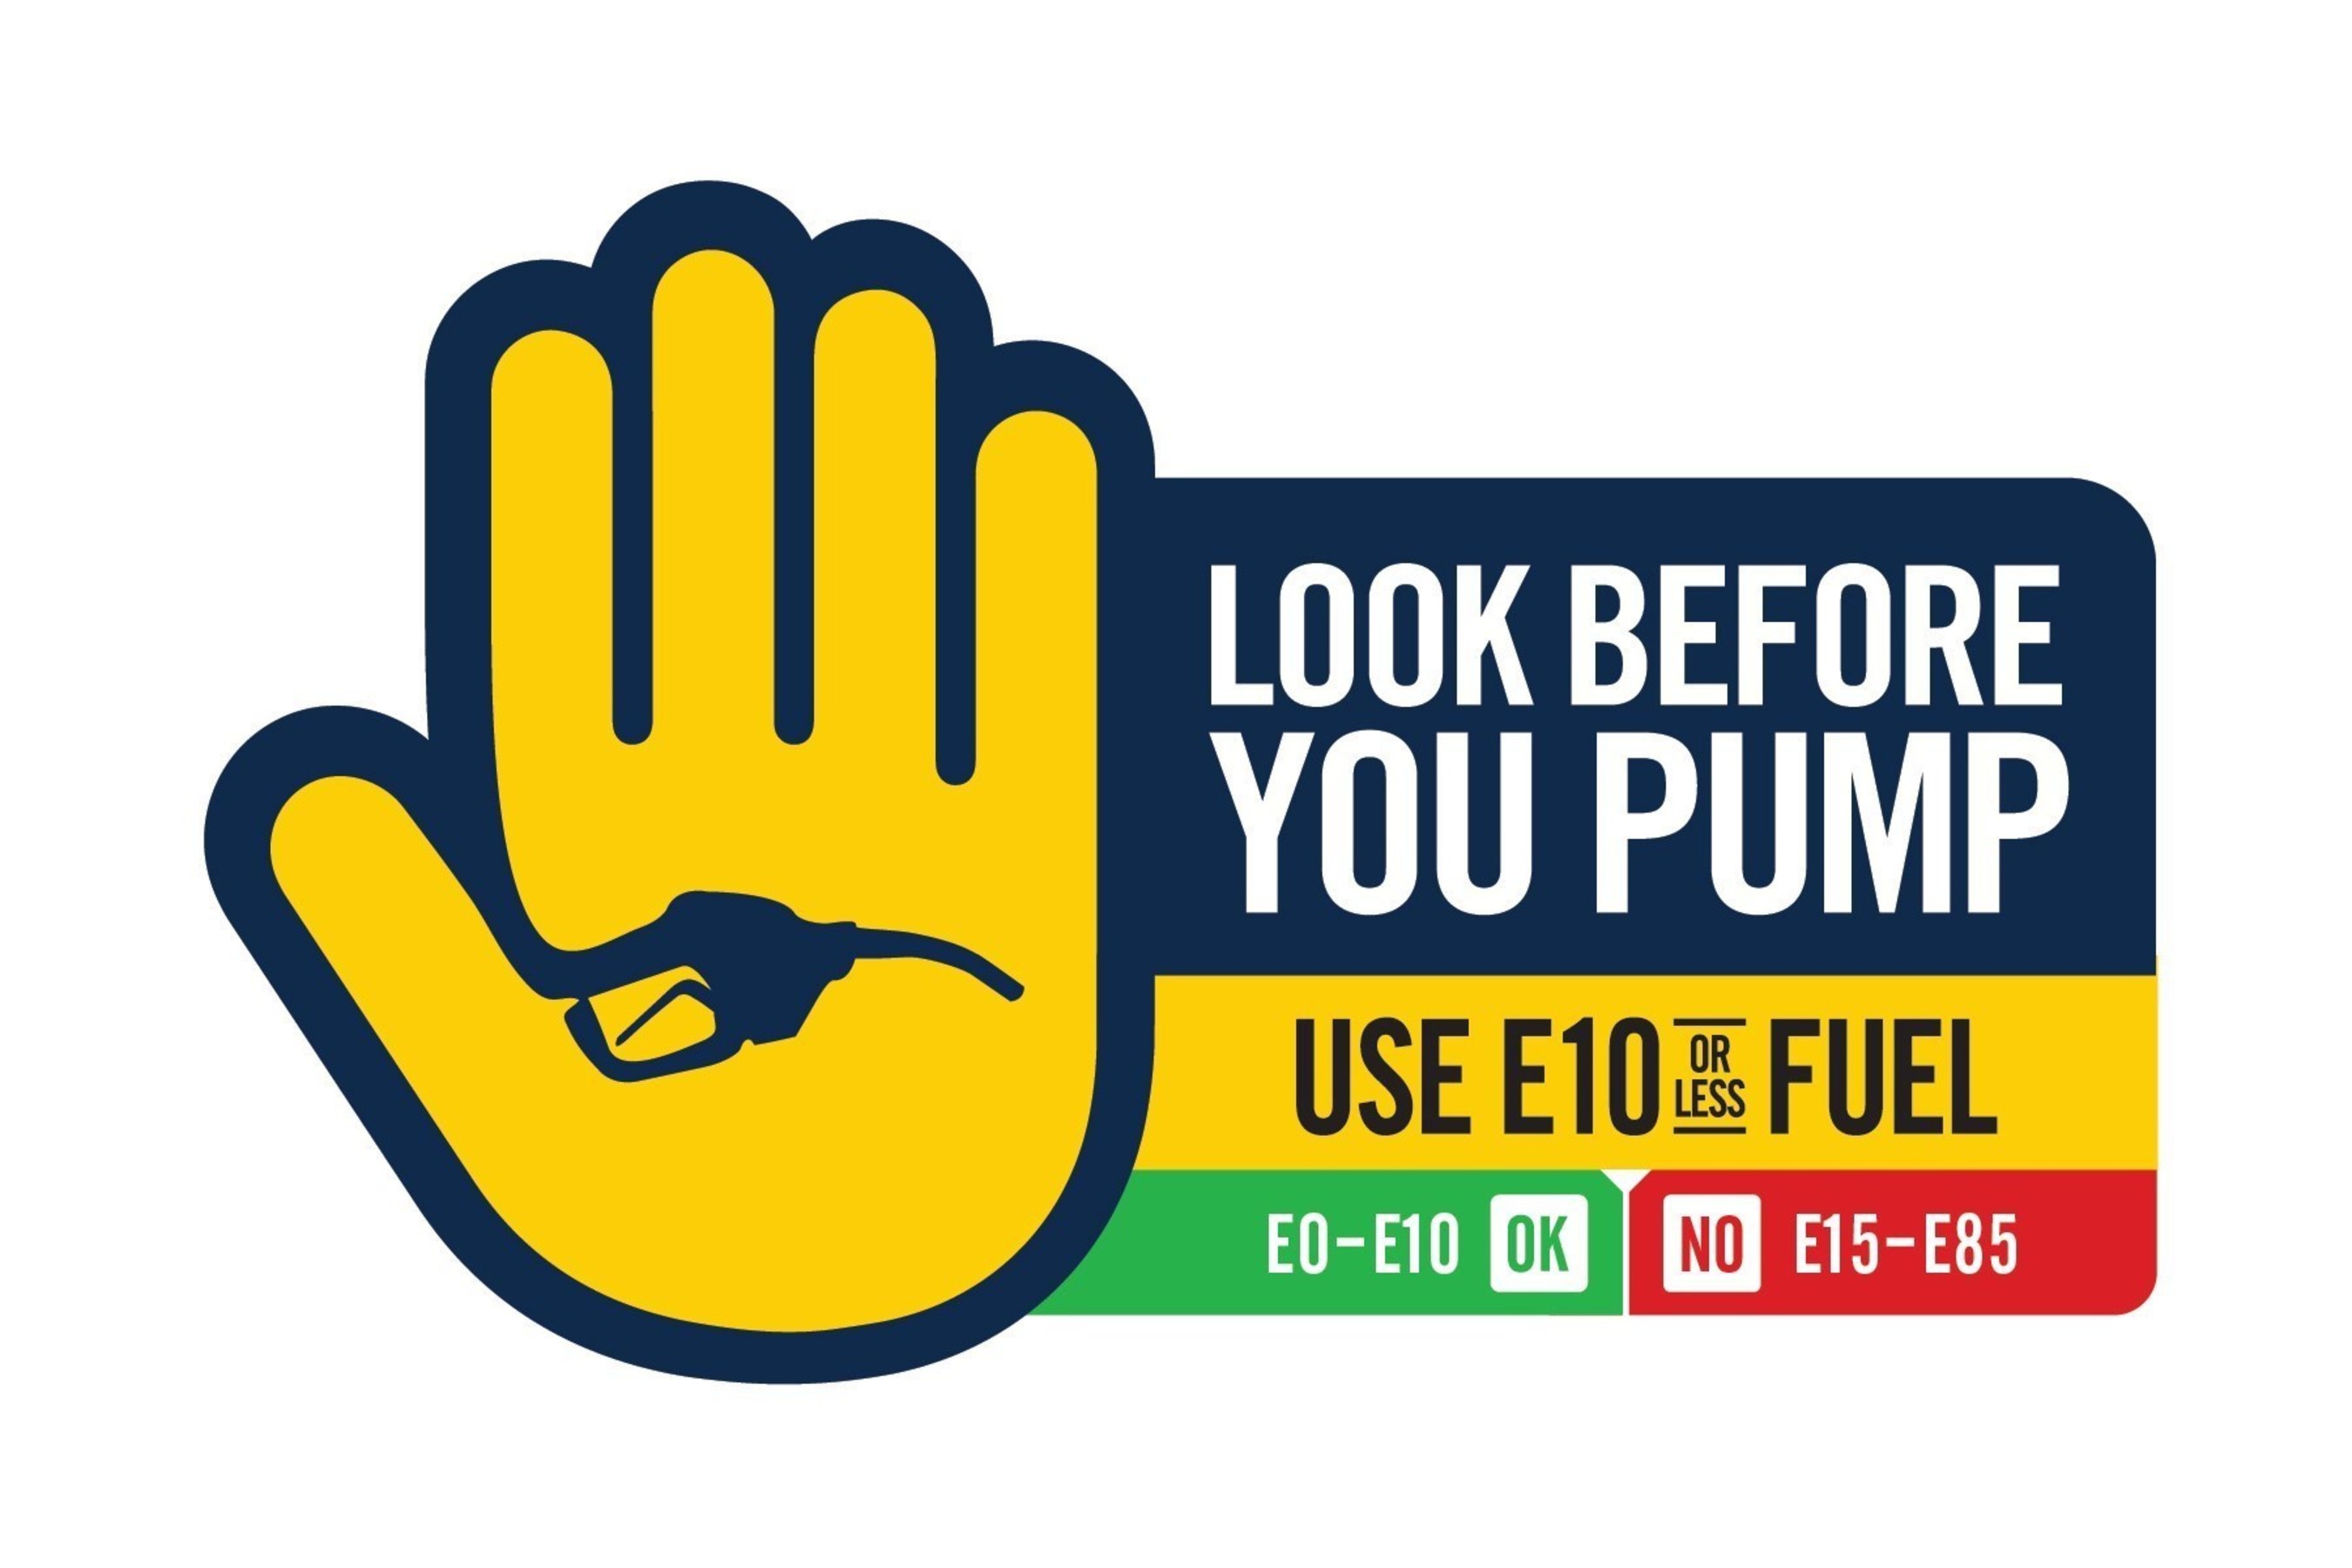 The Outdoor Power Equipment Institute (OPEI), the trade association representing power equipment, engine and utility vehicle manufacturers and suppliers, updates its free consumer and dealer education materials for its "Look Before You Pump" campaign in light of increased availability of higher ethanol fuel blends at gasoline filling stations.